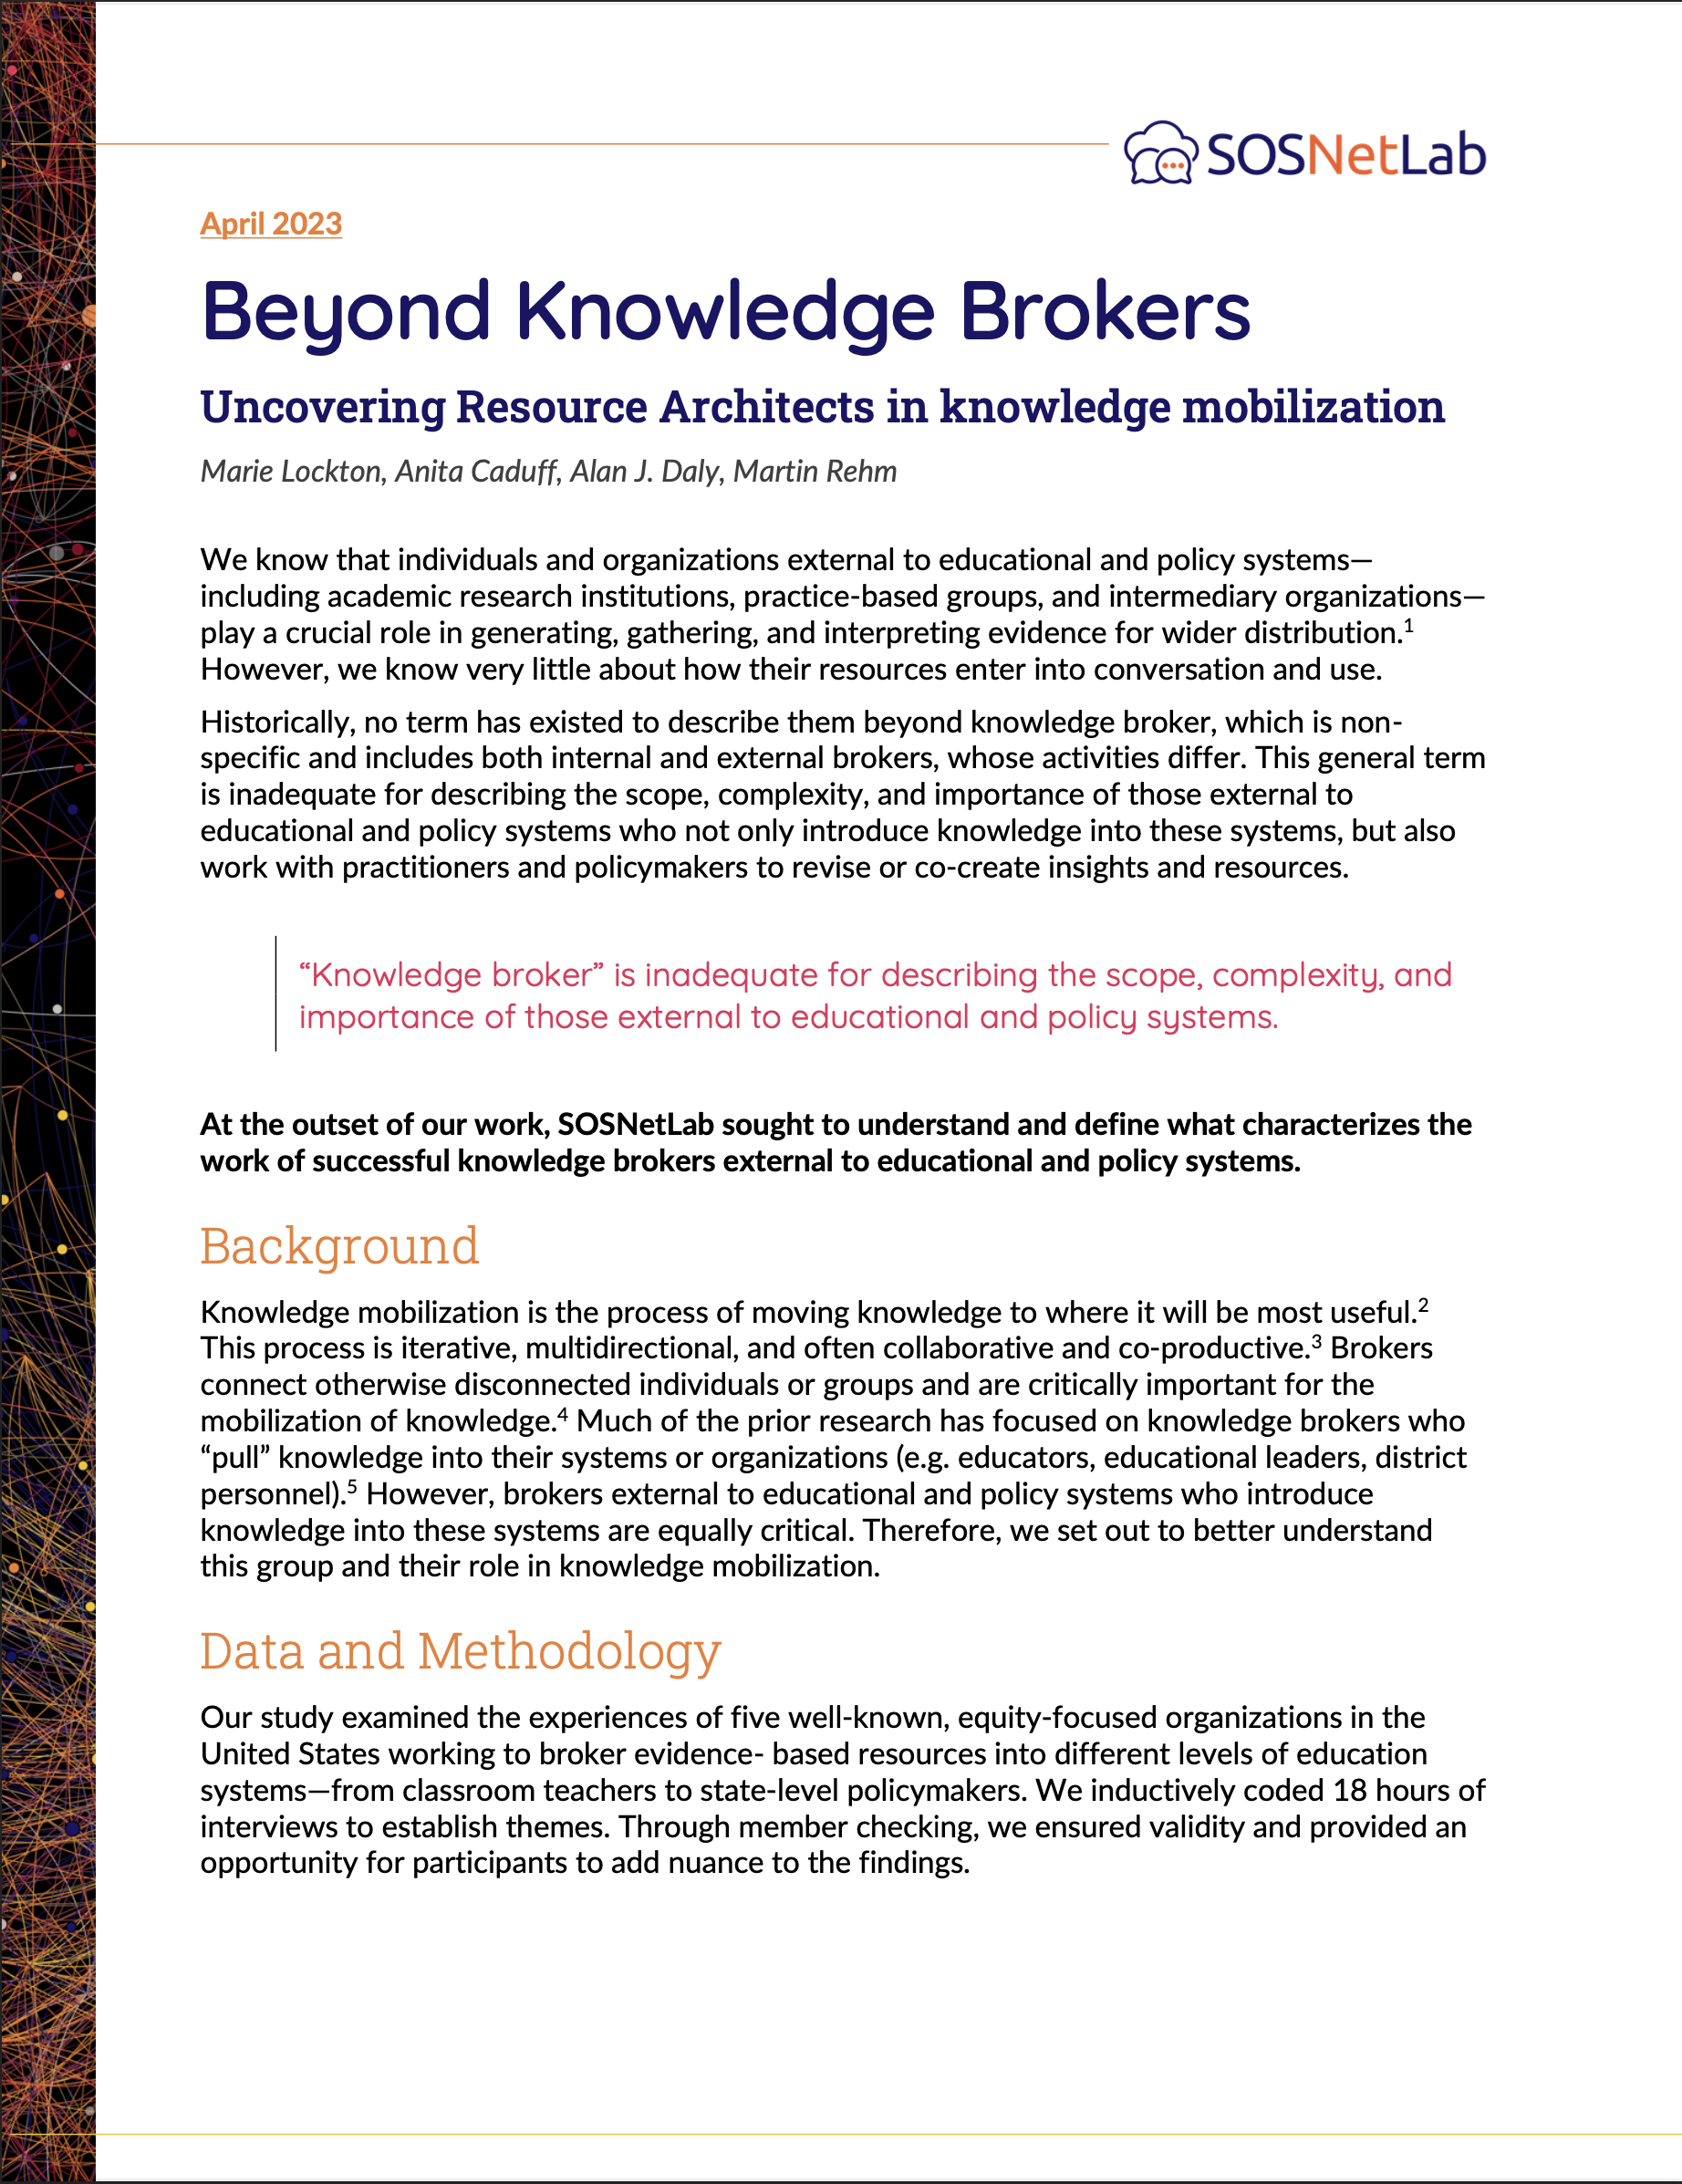 Beyond Knowledge Brokers: Uncovering Resource Architects in knowledge mobilization